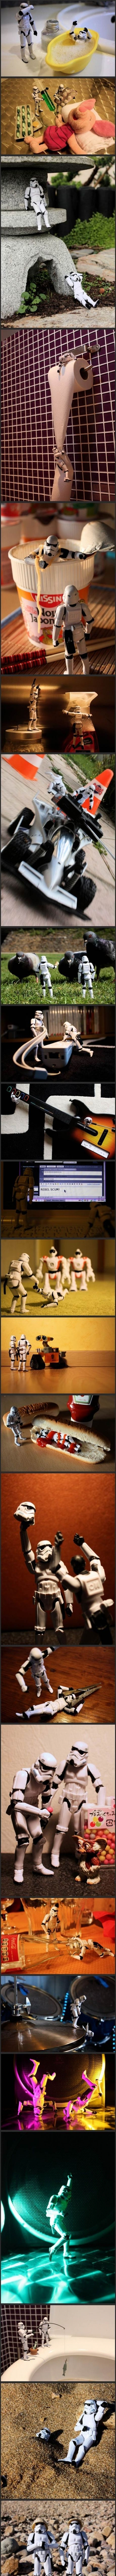 Storm troopers - A day in the life. 